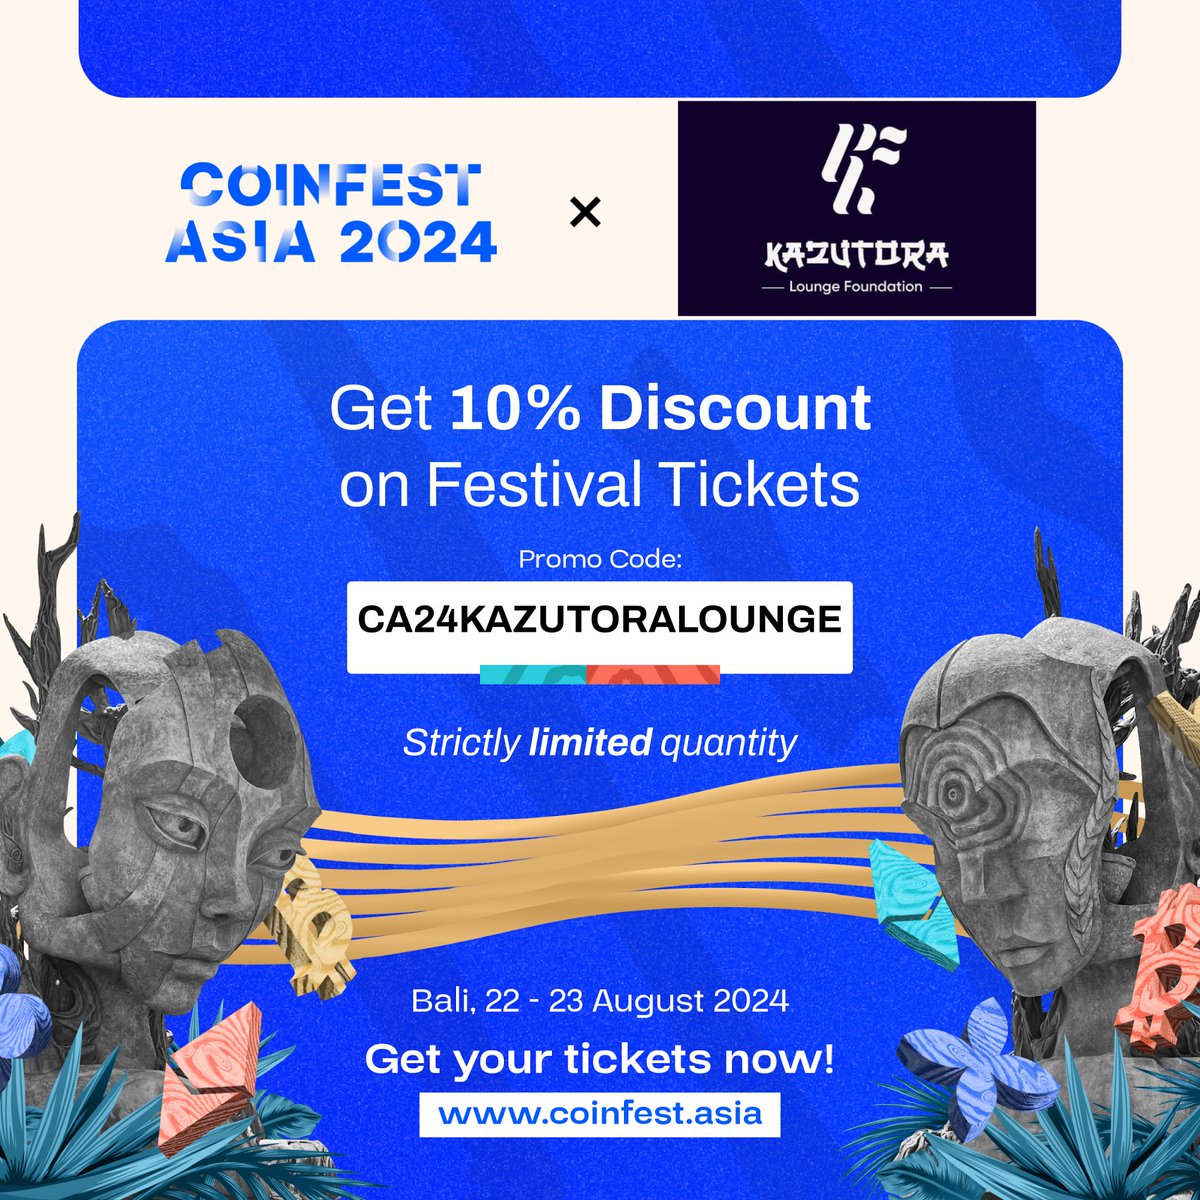 Kazutora Lounge is Coinfest Asia 2024 official community partner!

Get ready to connect with 6,000+ people from 2,000+ companies at the largest Web3 festival in Asia.

⭐️ Get your tickets :  coinfest.asia
- Use our special promo code to get 10% off!
- CA24KAZUTORALOUNGE